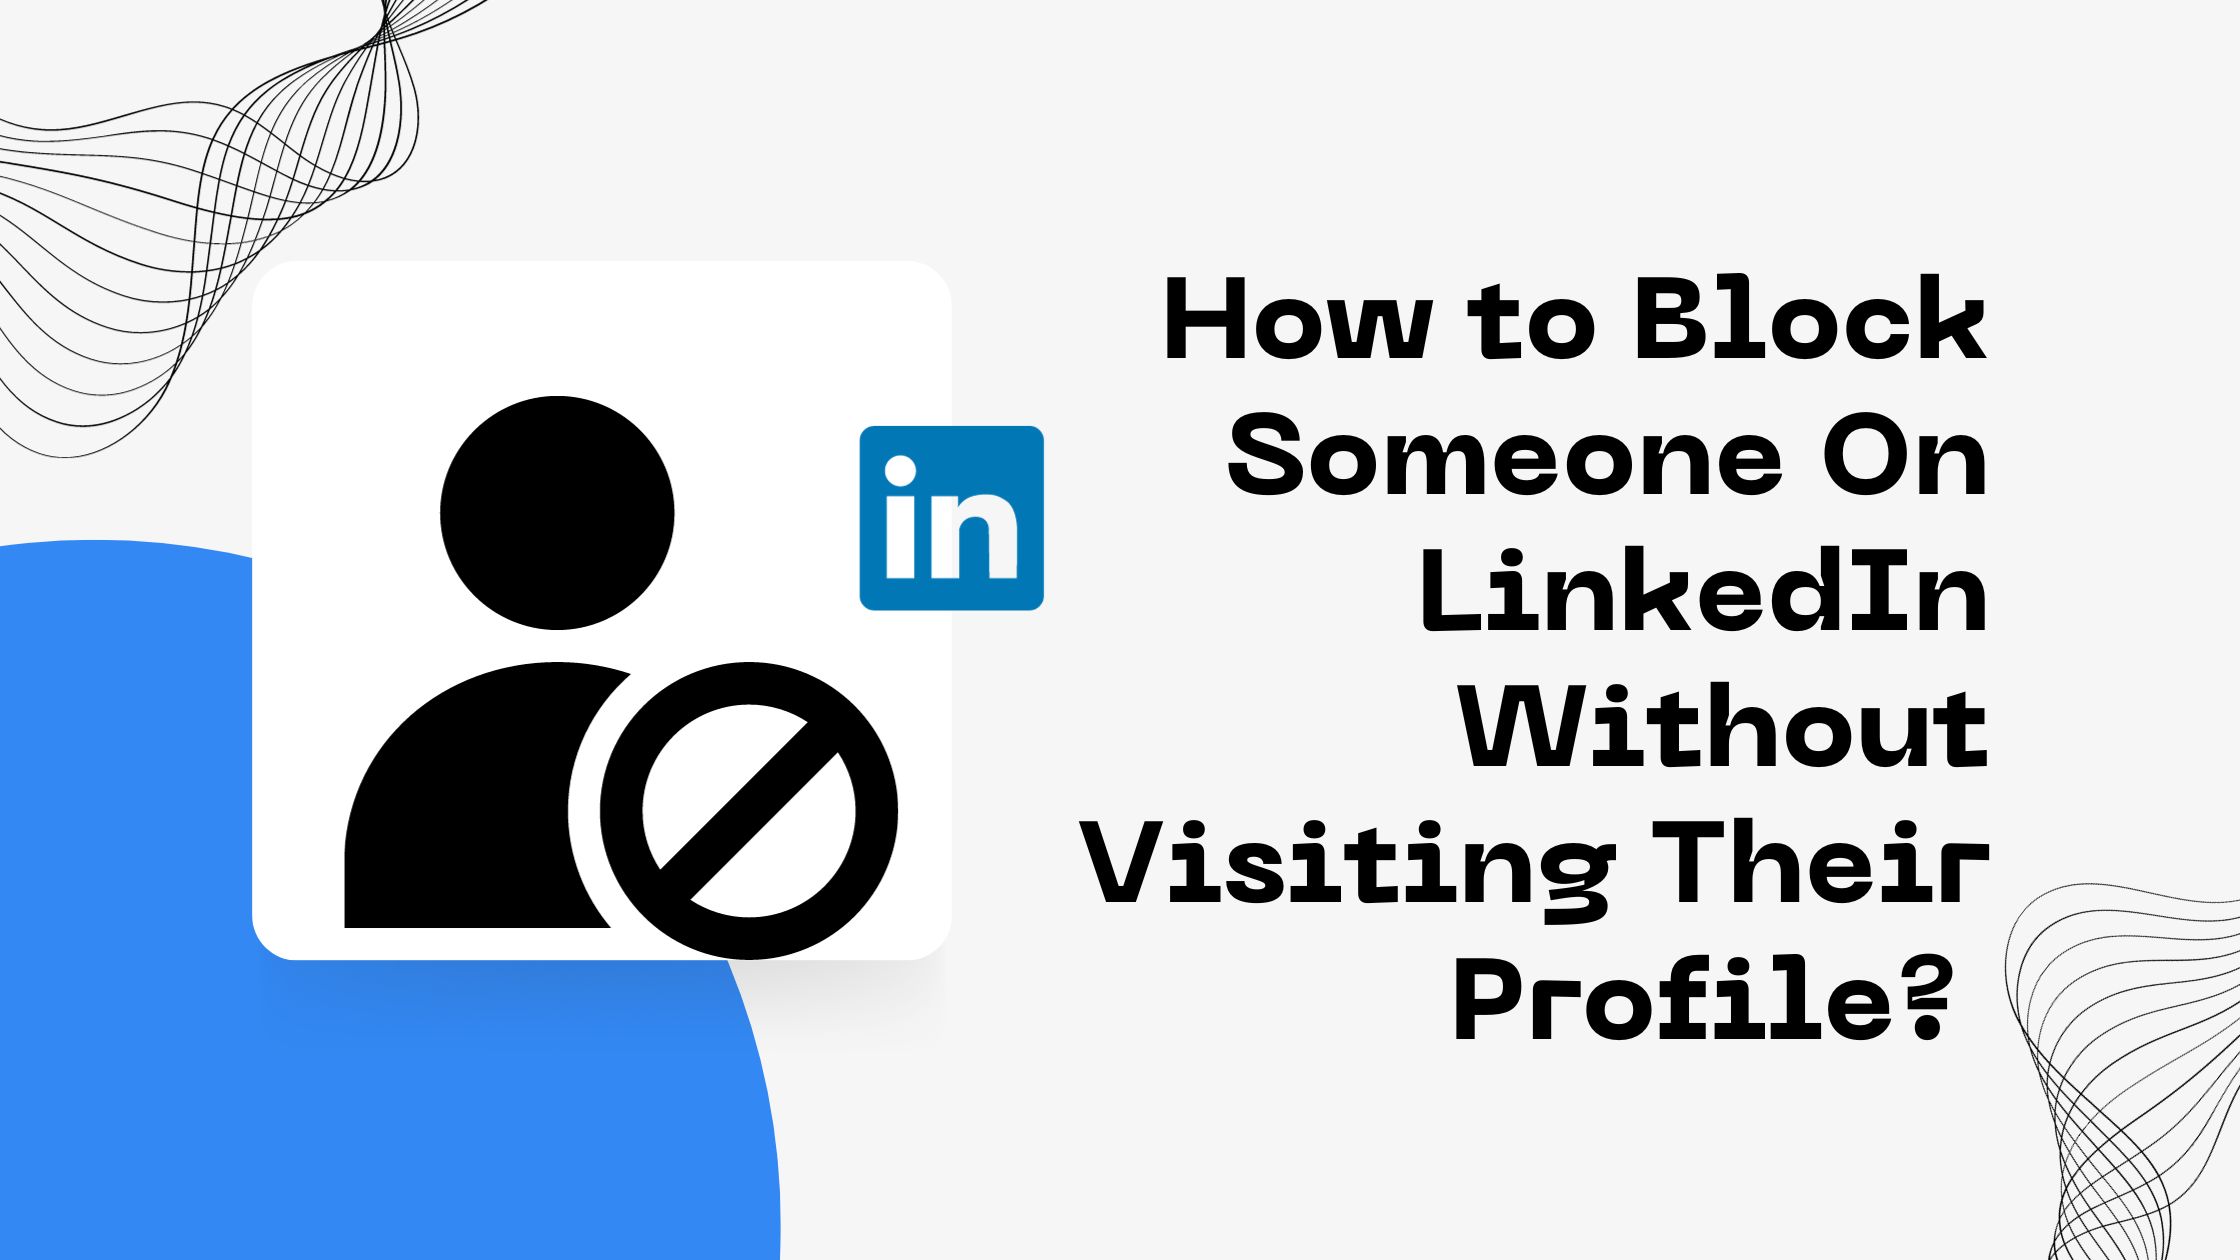 How to Block Someone On LinkedIn Without Visiting Their Profile?